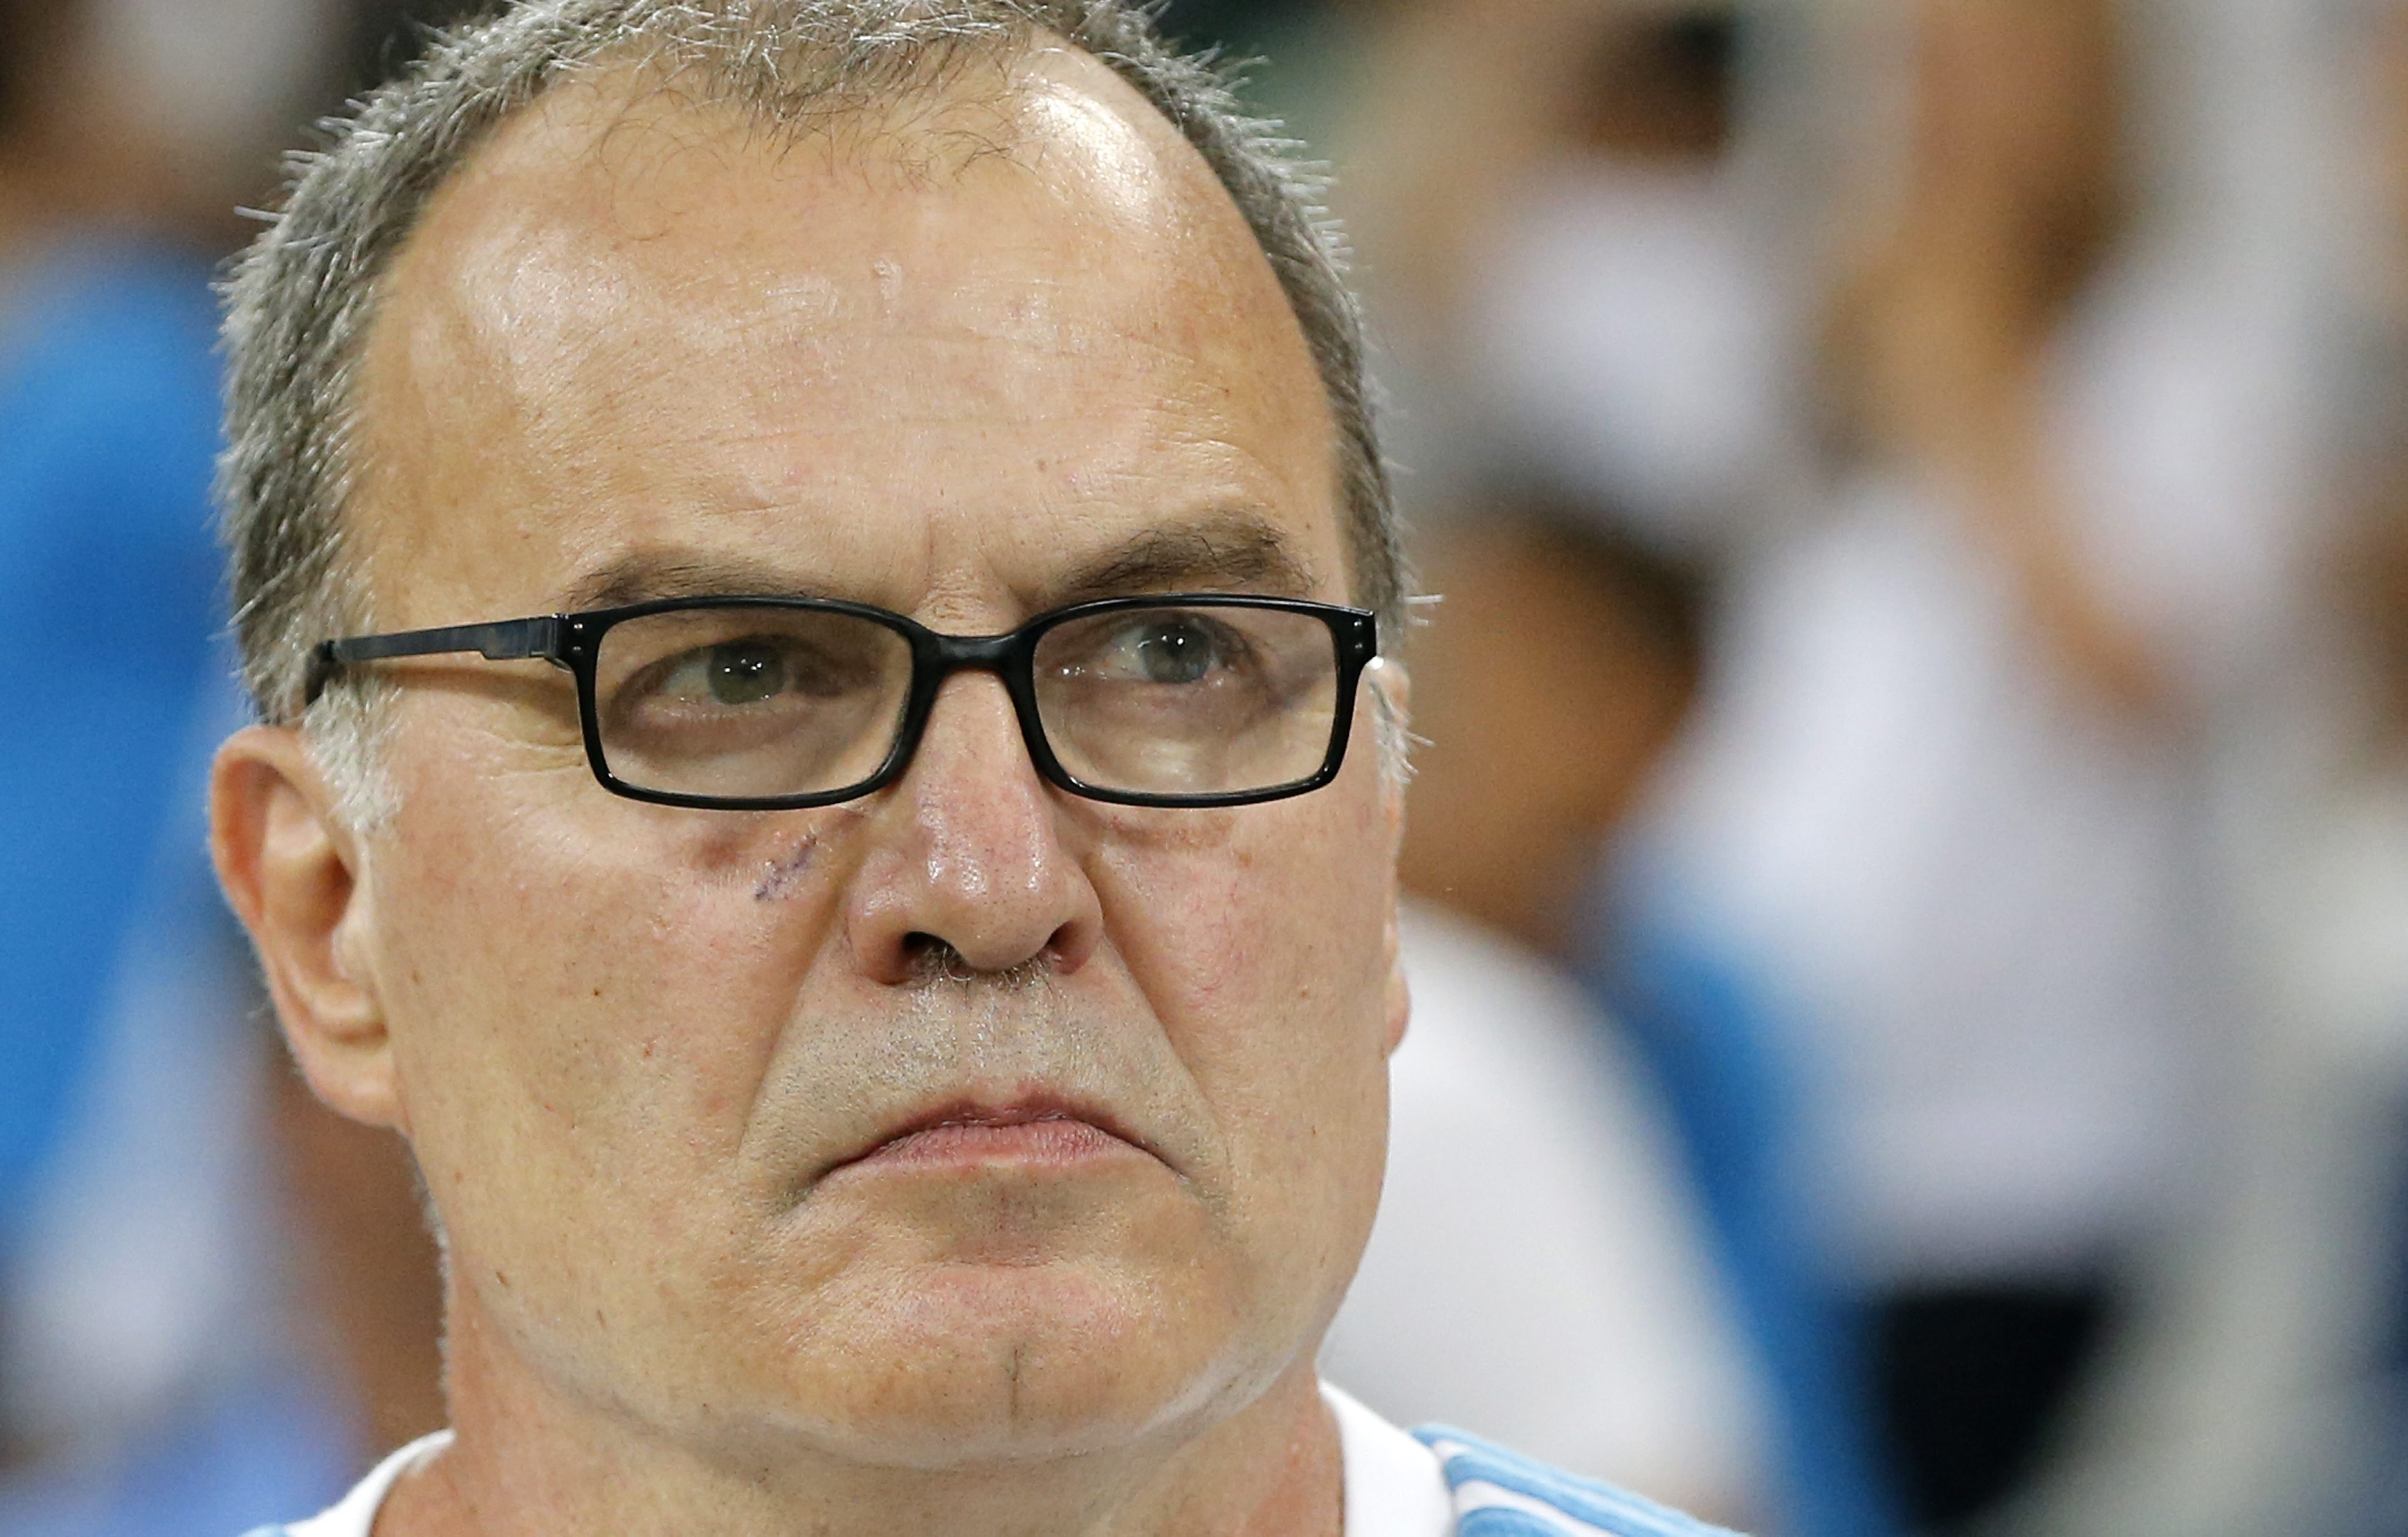 epa04877787 Olympique Marseille Argentinean head coach Marcelo Bielsa reacts before the soccer league 1 match between Olympique Marseille and SM Caen, at Velodrome stadium, Marseille, Southern France, 8 August 2015. Bielsa announced his resignation from the soccer club, in a surprise move, minutes after Olympique Marseille's 0-1 loss to SM Caen.  EPA/GUILLAUME HORCAJUELO